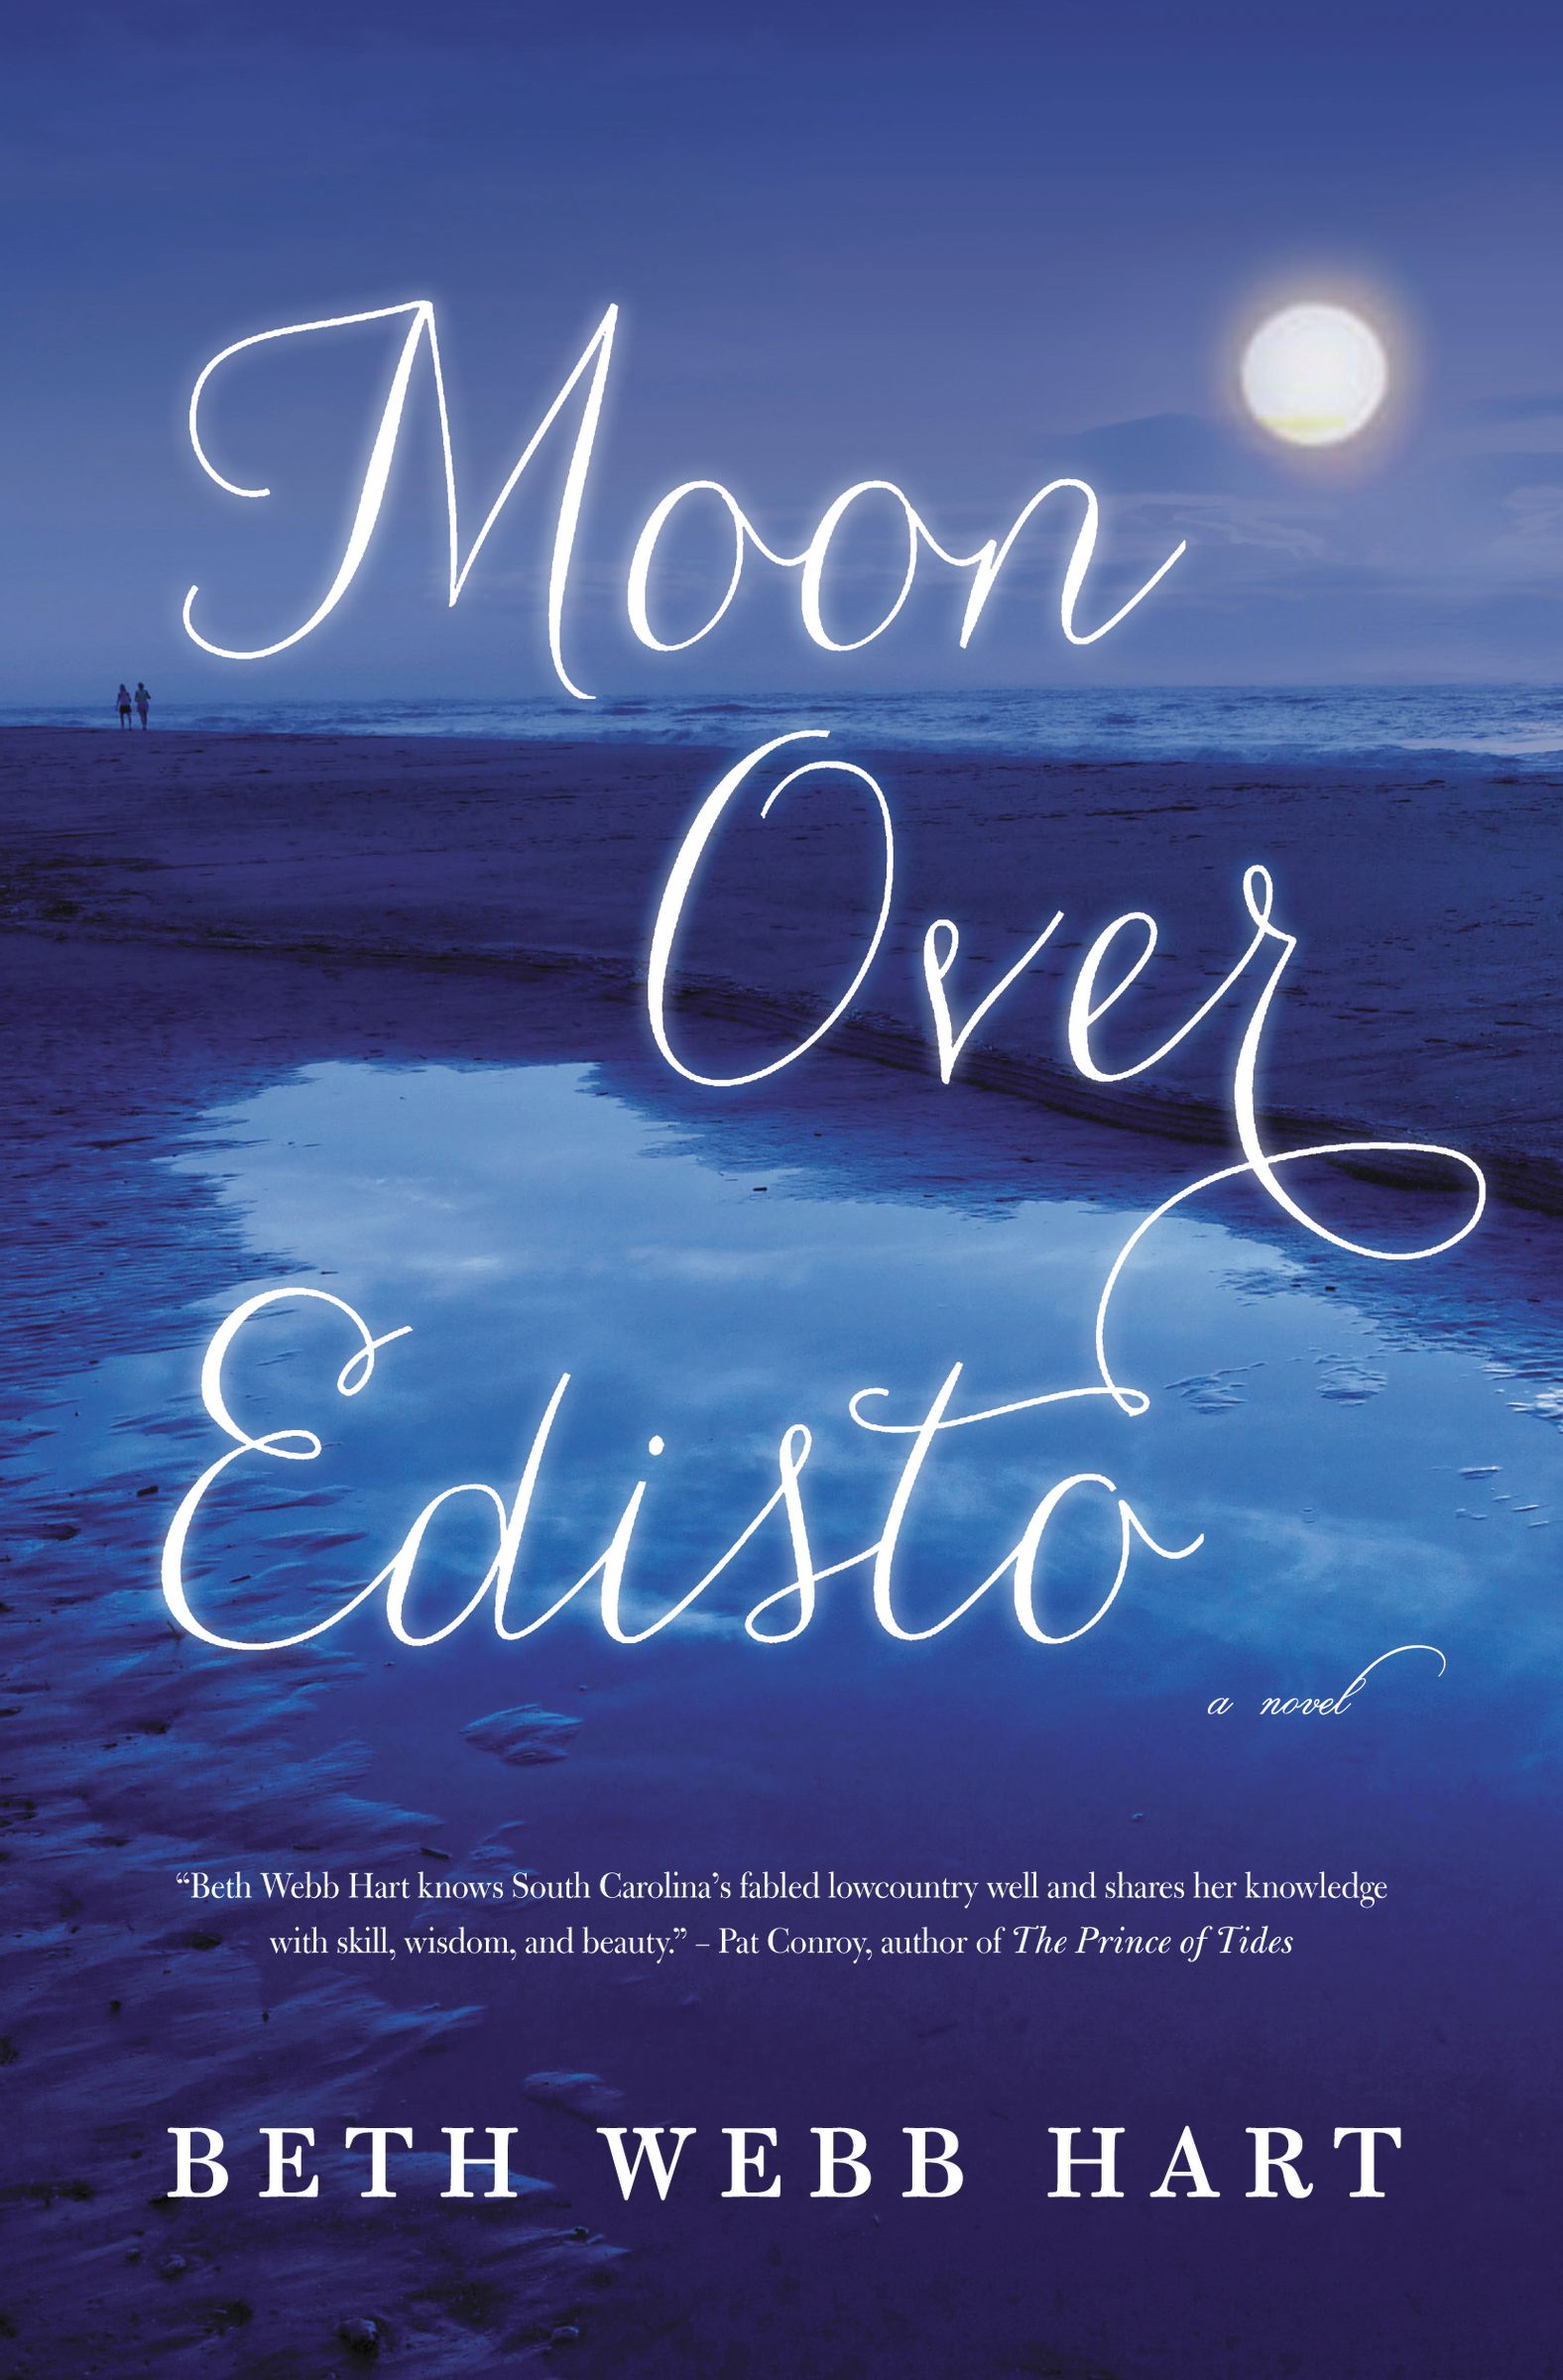 Image of Moon Over Edisto other